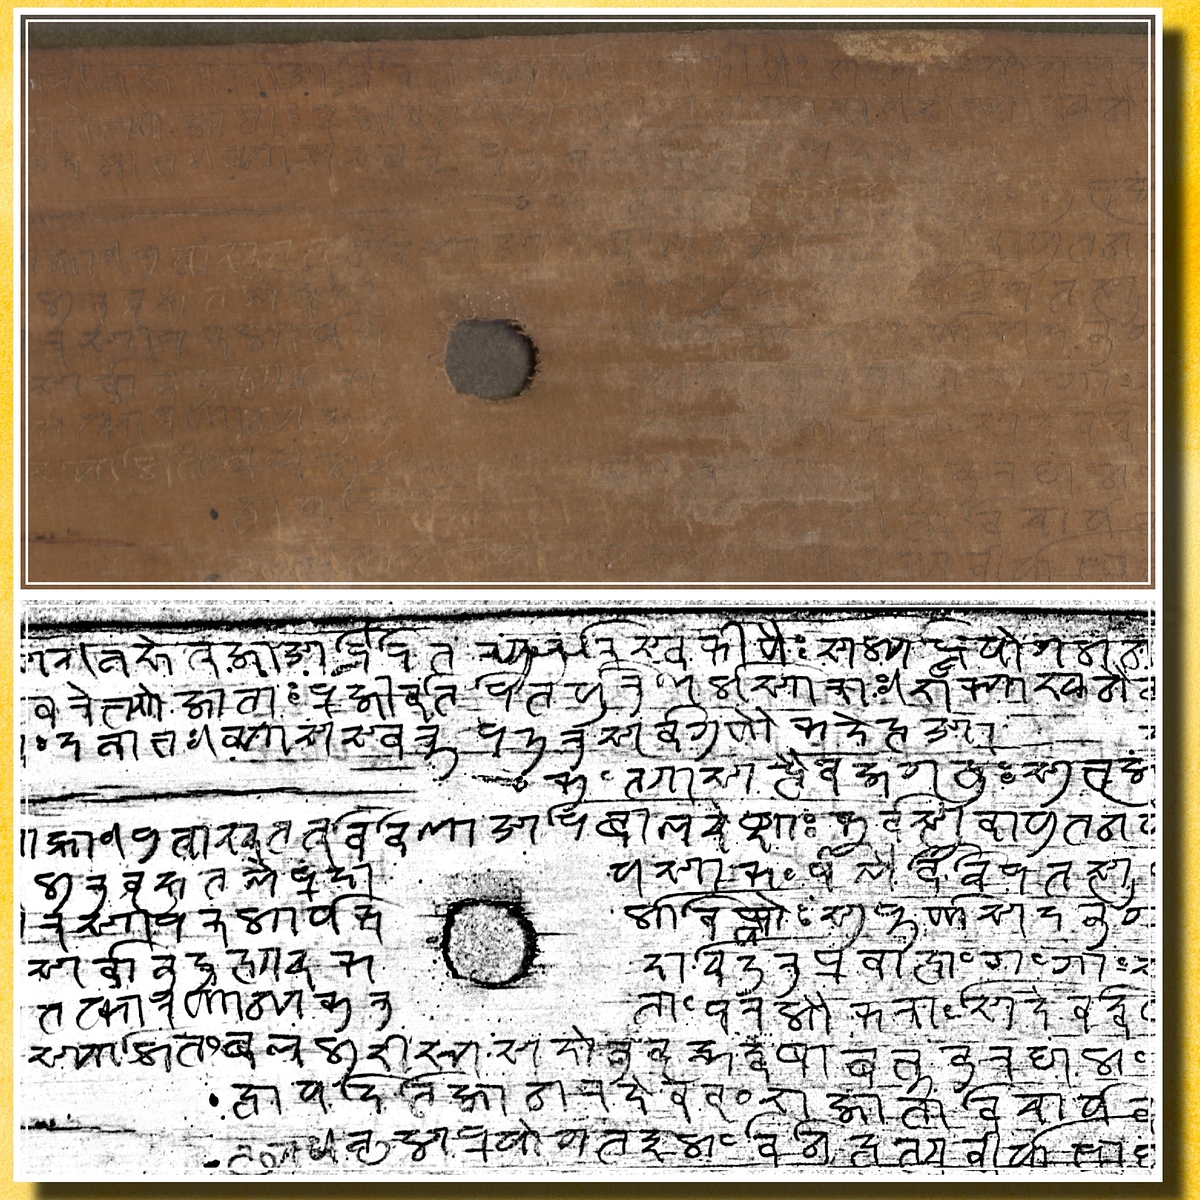 Before- After images of a manuscript